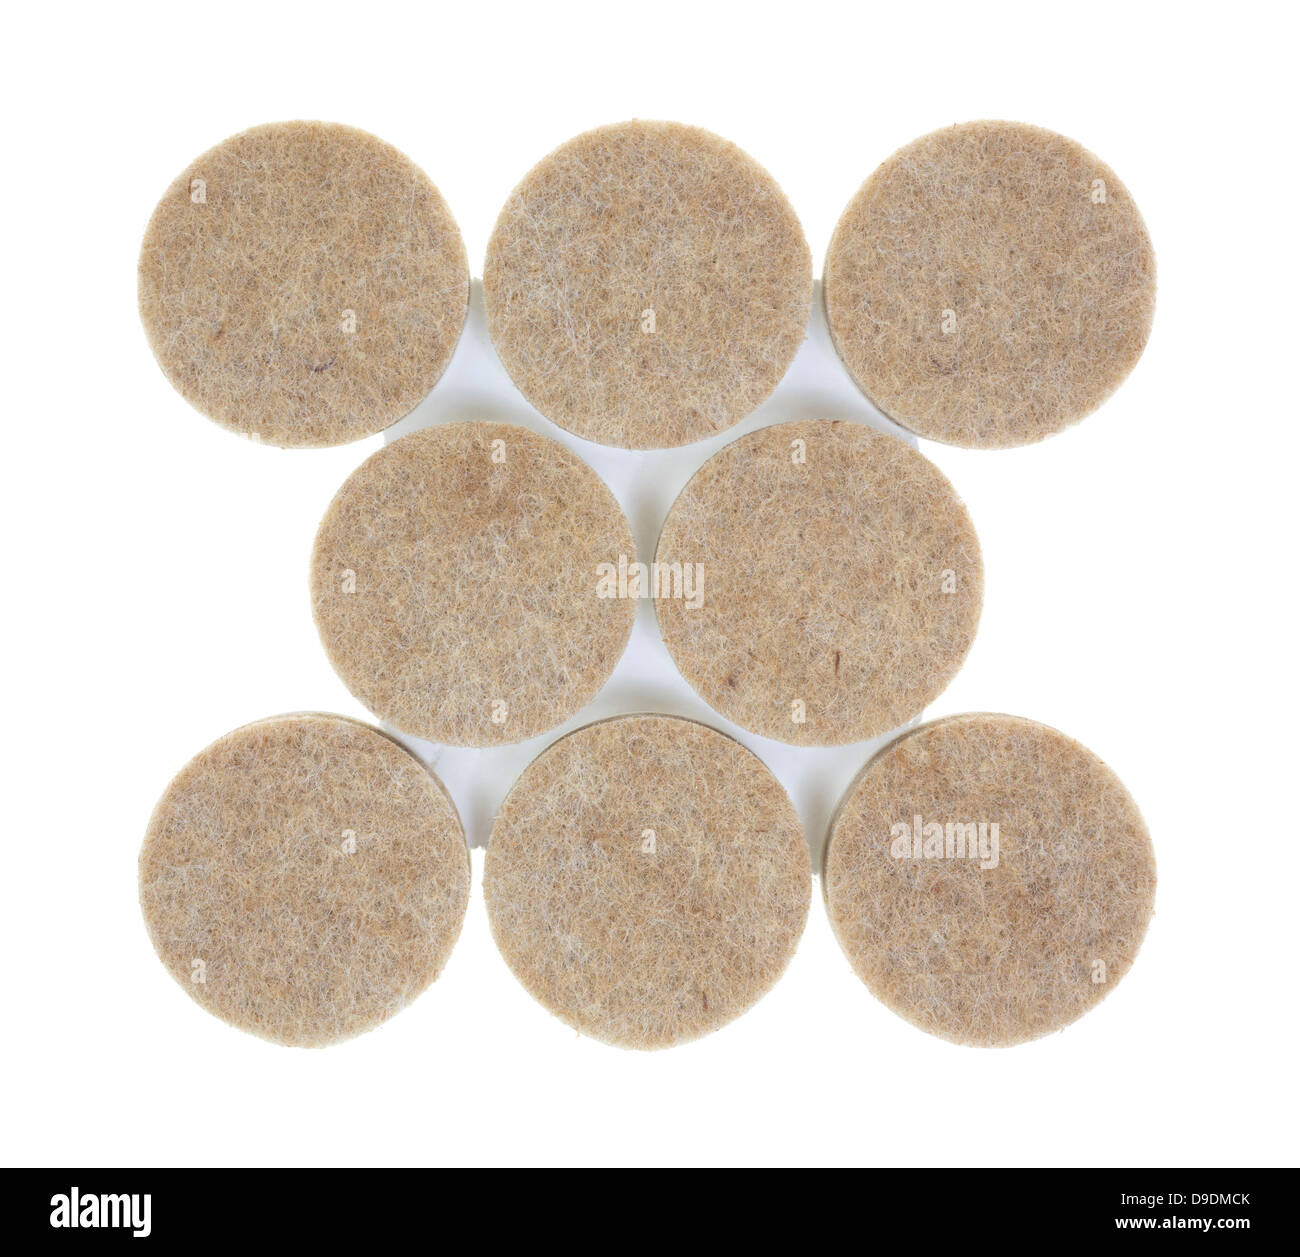 A group of new felt surface protectors on a white background. Stock Photo